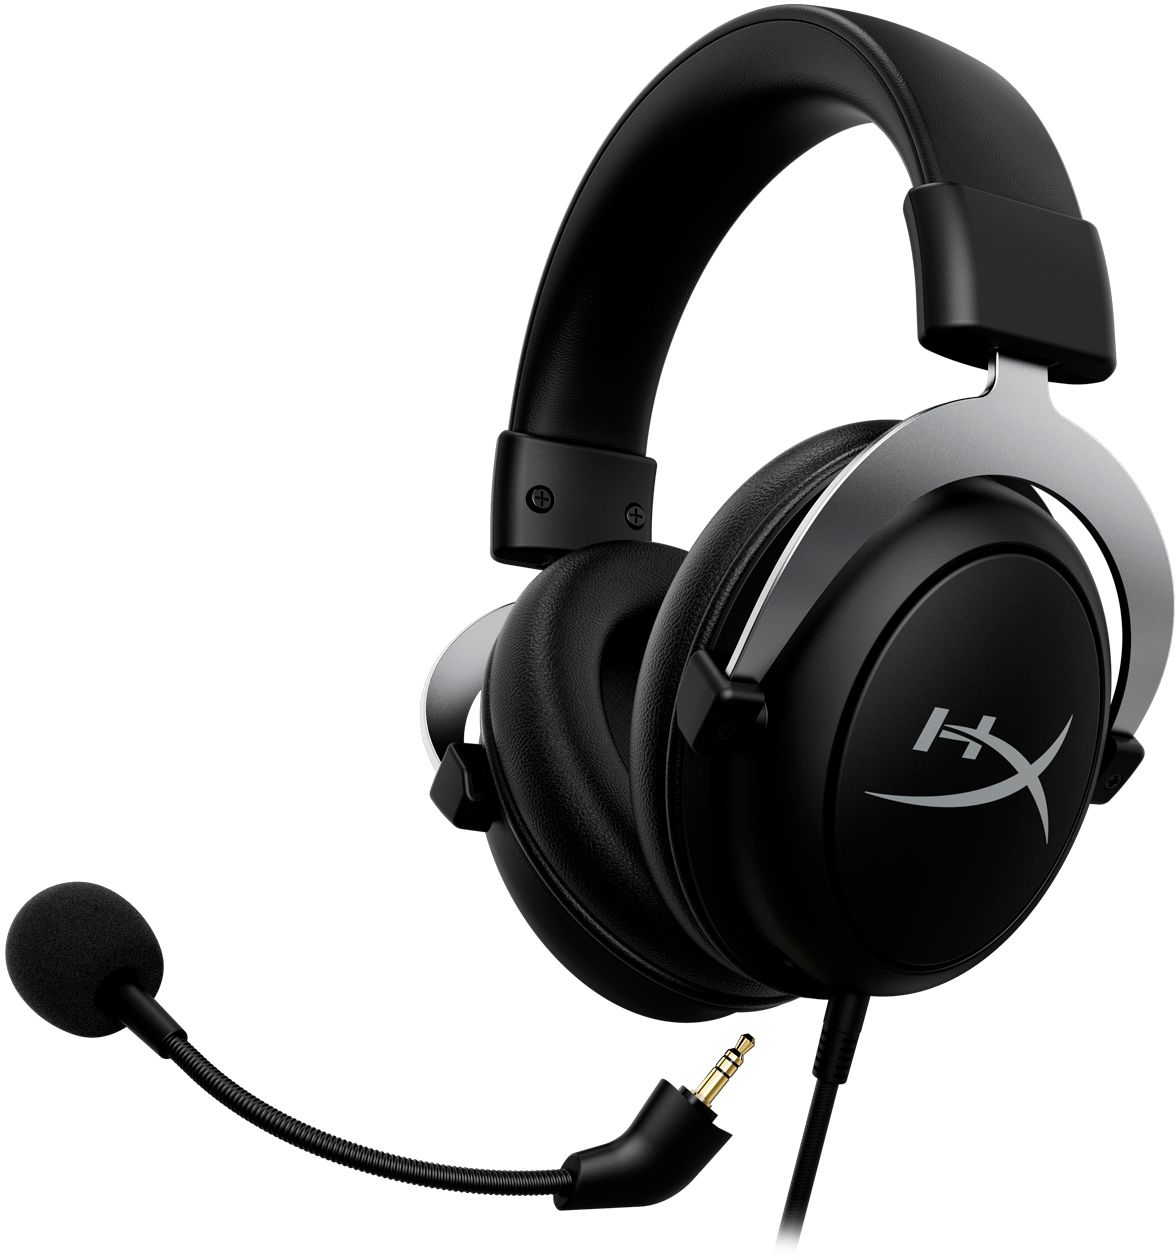 Hyperx Cloudx Wired Gaming Headset For Xbox X S And Xbox One Black Silver 4p5h8aa Hhsc2 Cg Sl G Best Buy